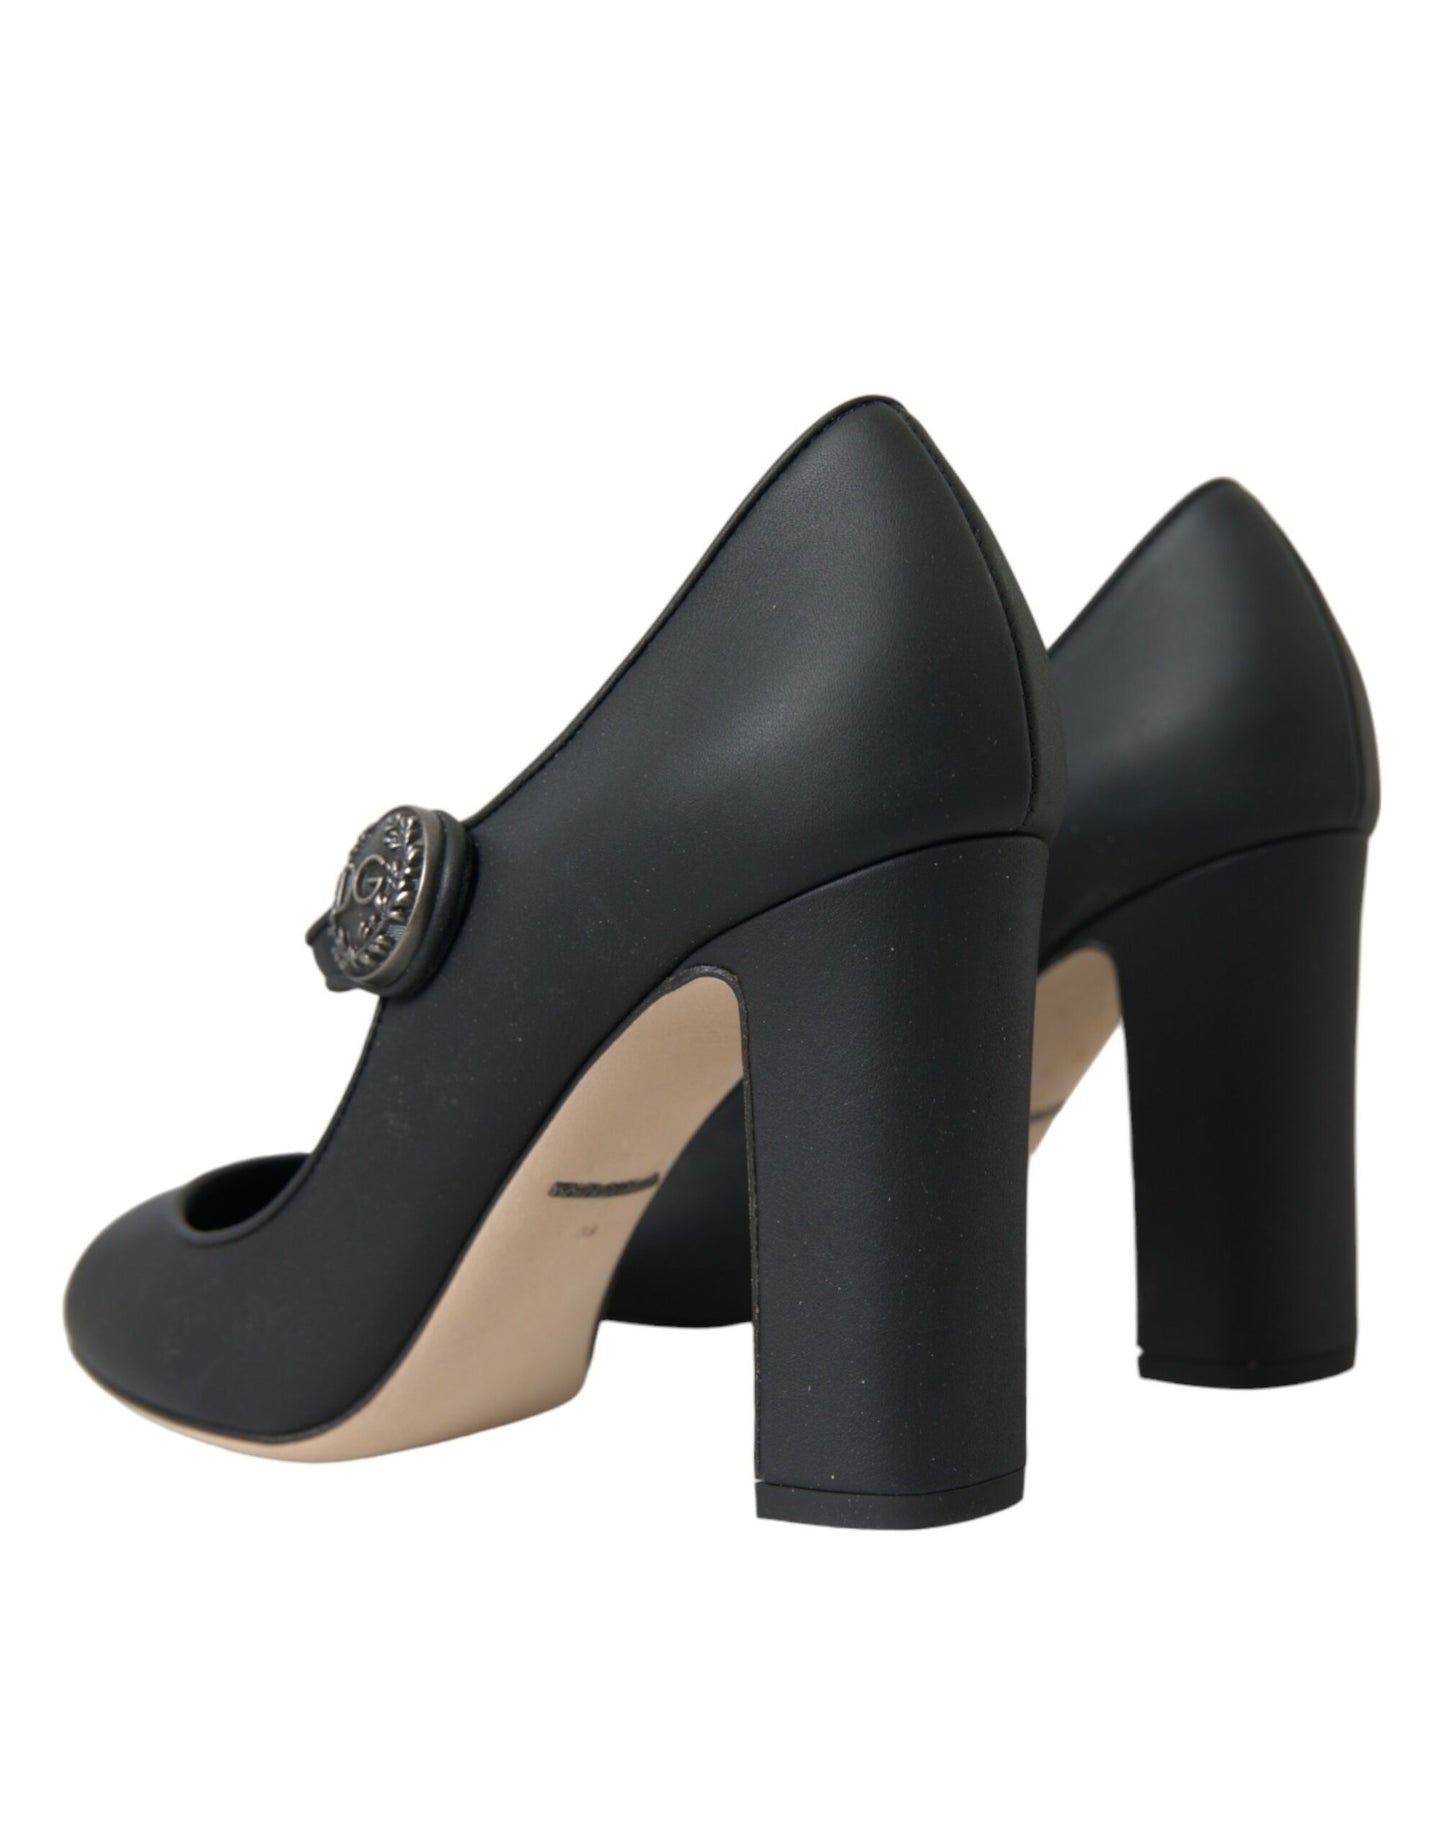 Black Leather Mary Jane Pumps Heels Shoes